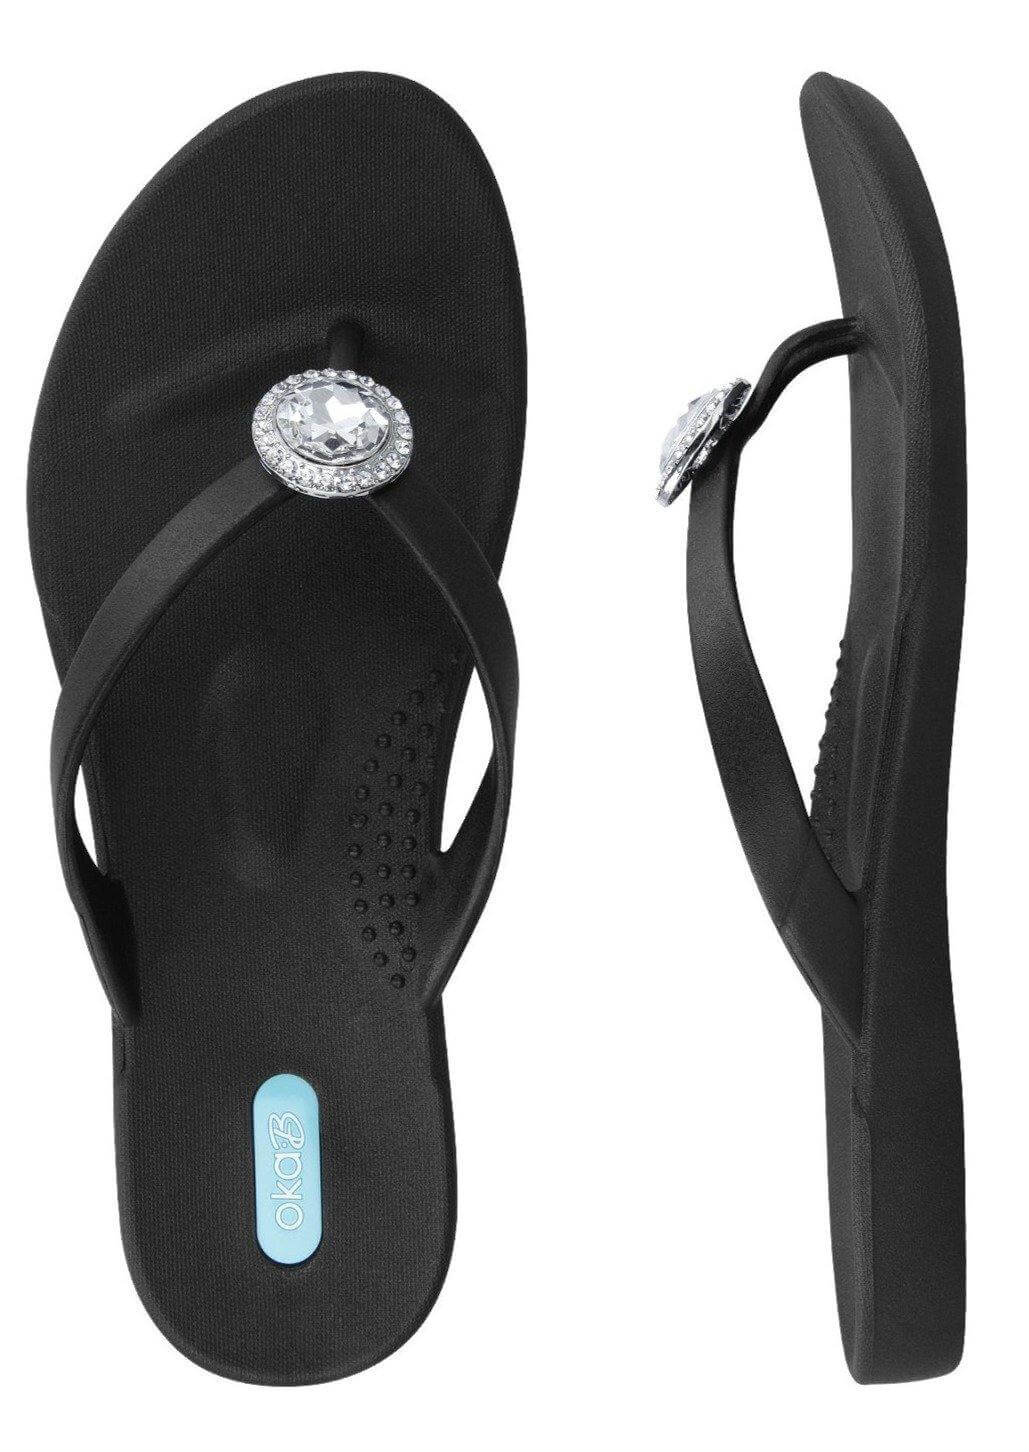 Brand: Oka-B - Oka-B Halo Black Bling Summer Beach Flip Flops -  Beach Wear, Black, Bling, Featured, Flip Flops, Halo, Made in America, made in usa, Rhinestone, Sandals, Shoes made local, Spring, Summer, Thong, Women Shoes - Classy Cozy Cool Boutique